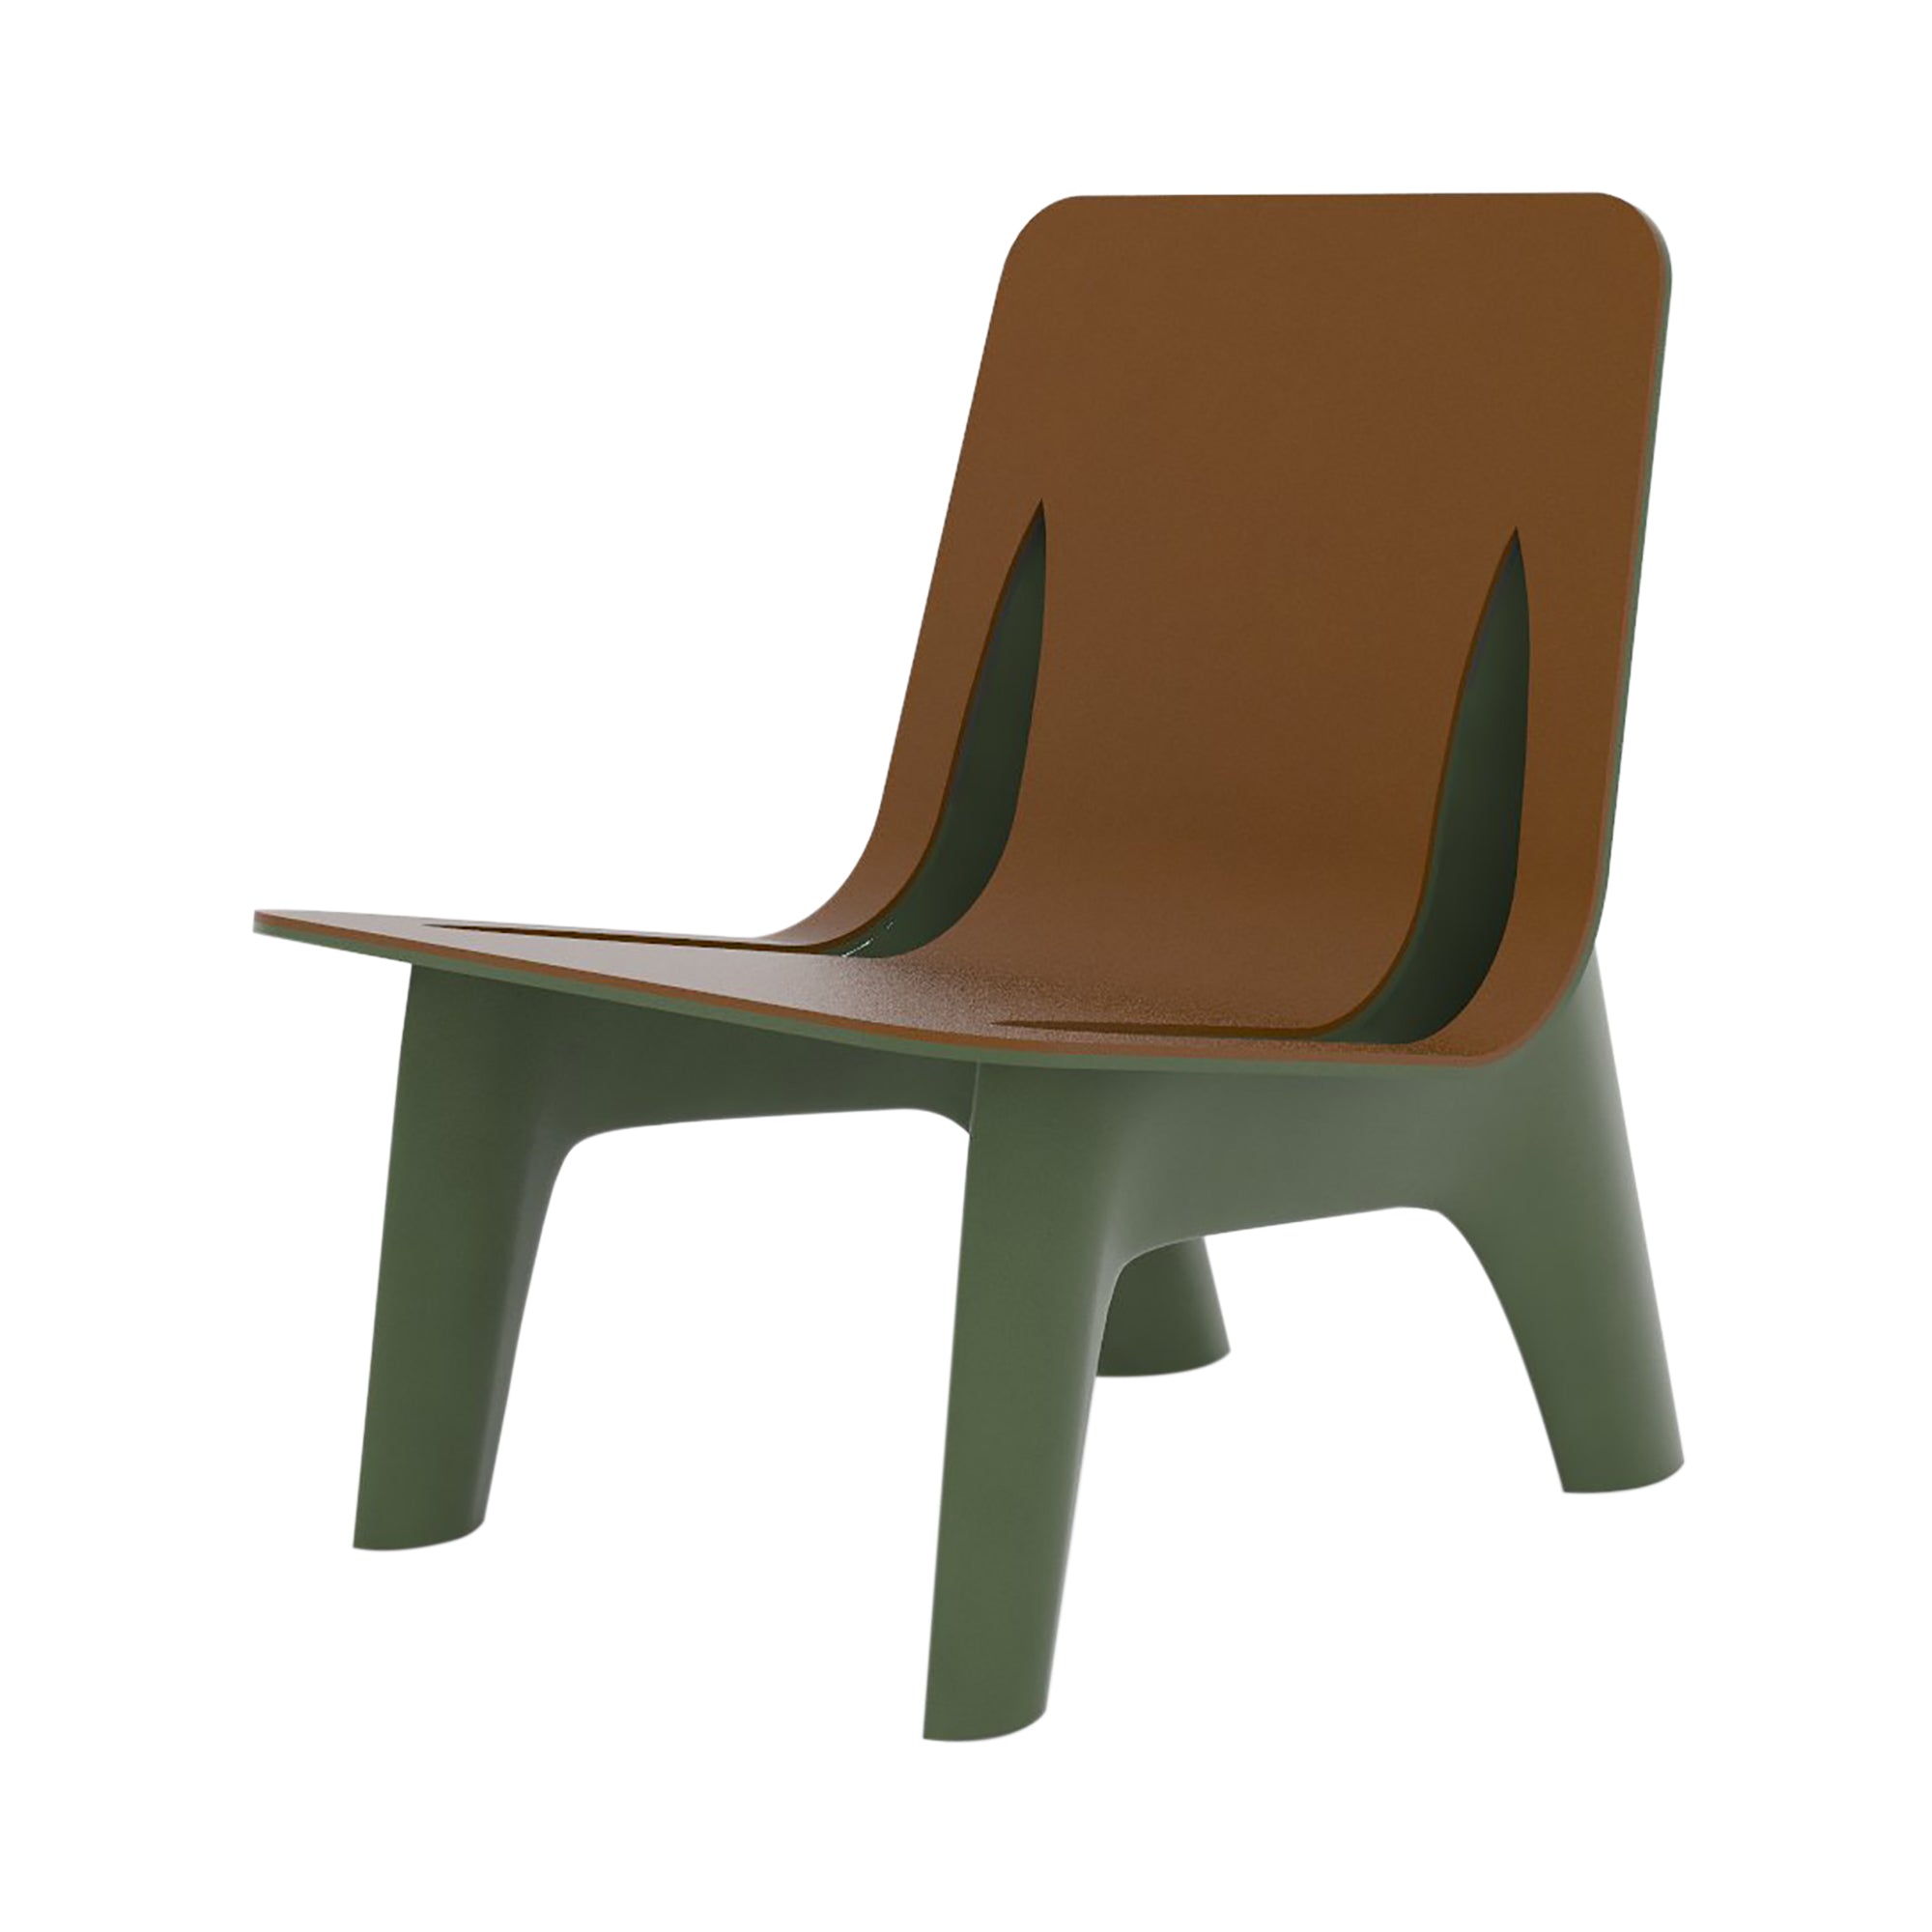 J-Chair Lounge: Leather Seat + Aluminum + Olive Green + Brown